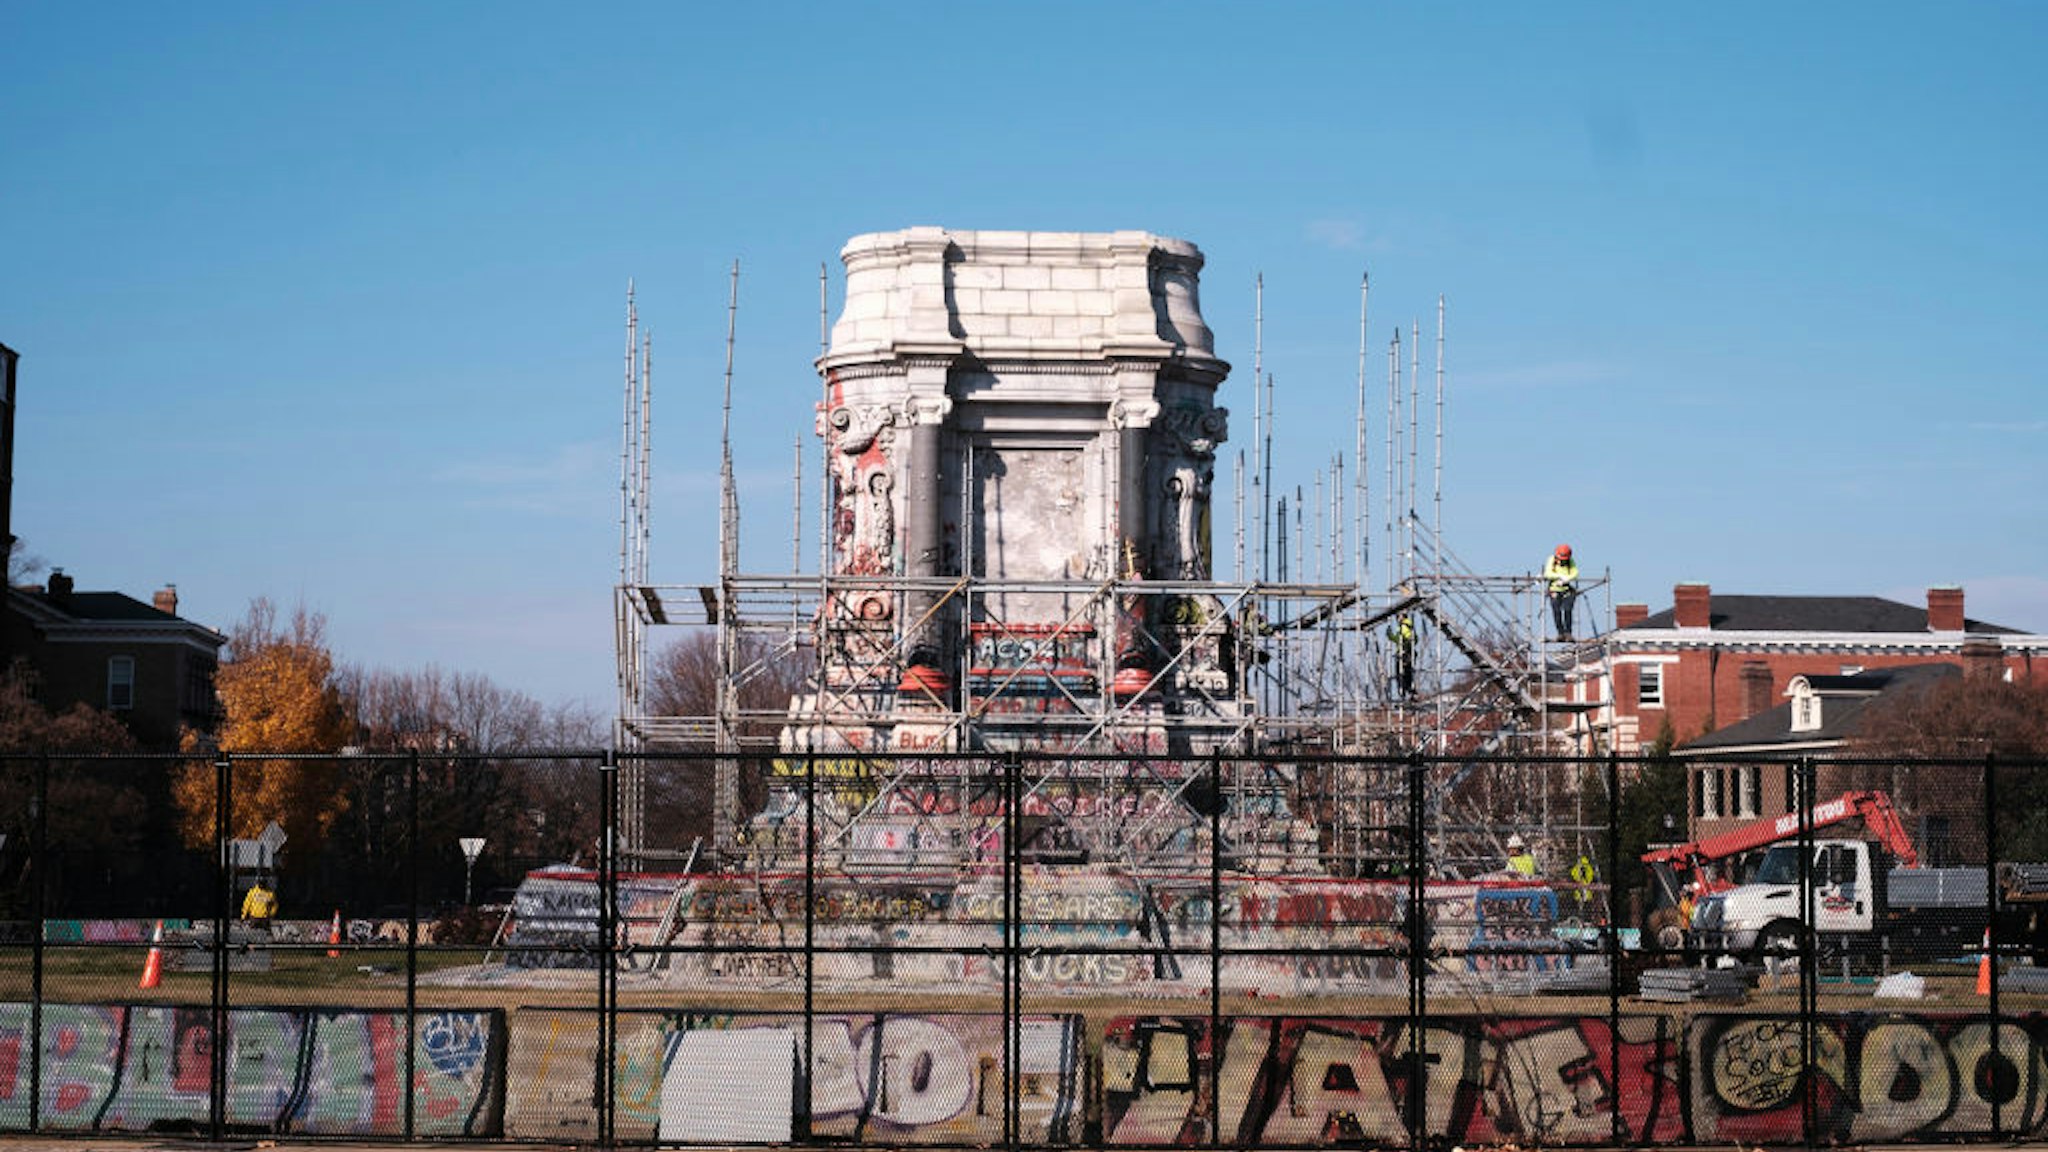 RICHMOND, VA - DECEMBER 06: Construction workers erect scaffolding around a pedestal as they prepare to dismantle it on December 6, 2021 in Richmond, Virginia. Governor Ralph Northam announced, on December 5th, that his administration will remove the pedestal that a statue of Robert E Lee once stood on. (Photo by Eze Amos/Getty Images)